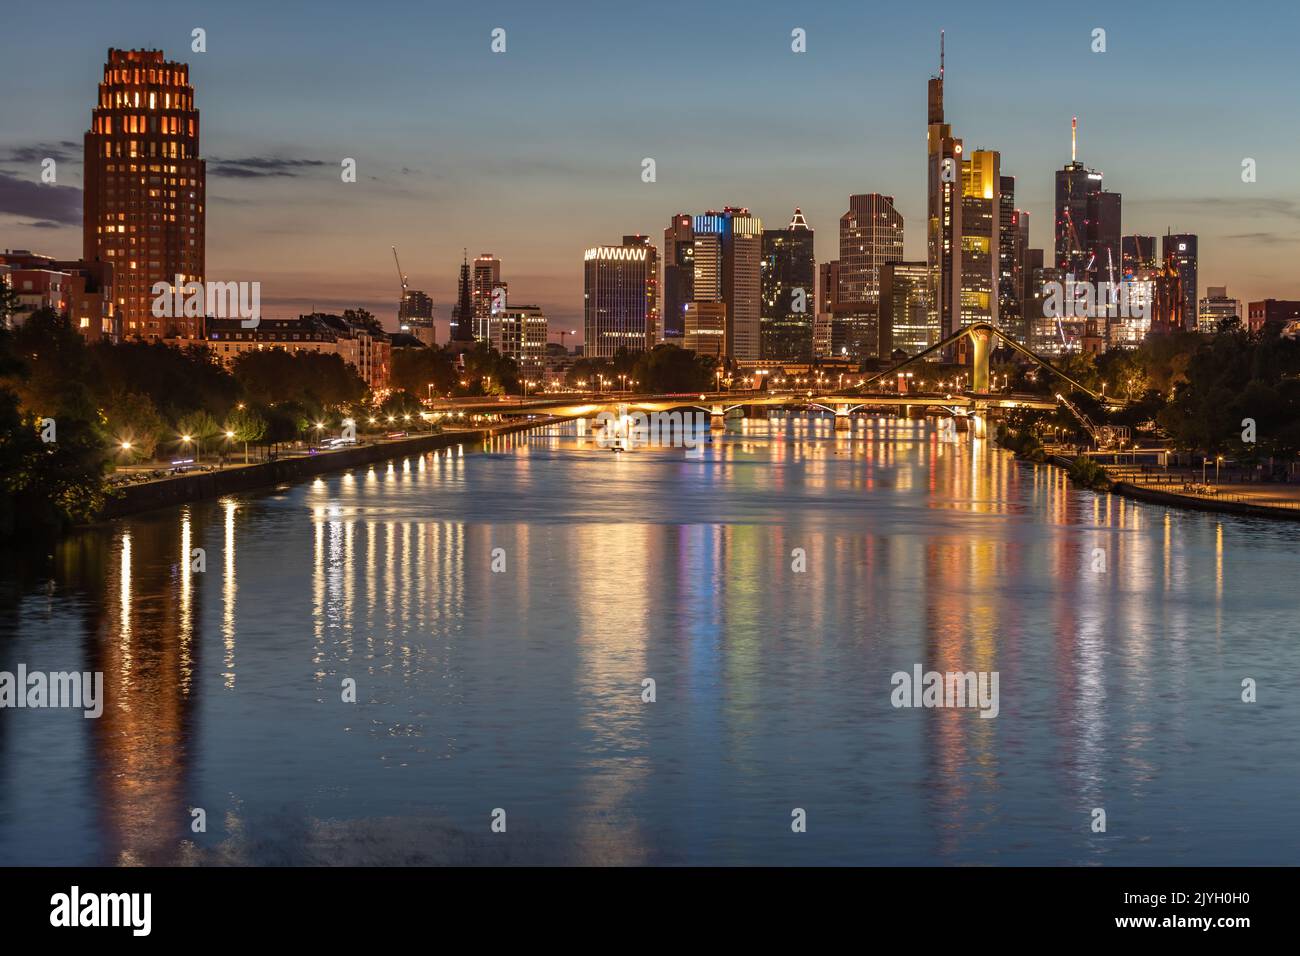 View over the Main to the Frankfurt skyline at night Stock Photo